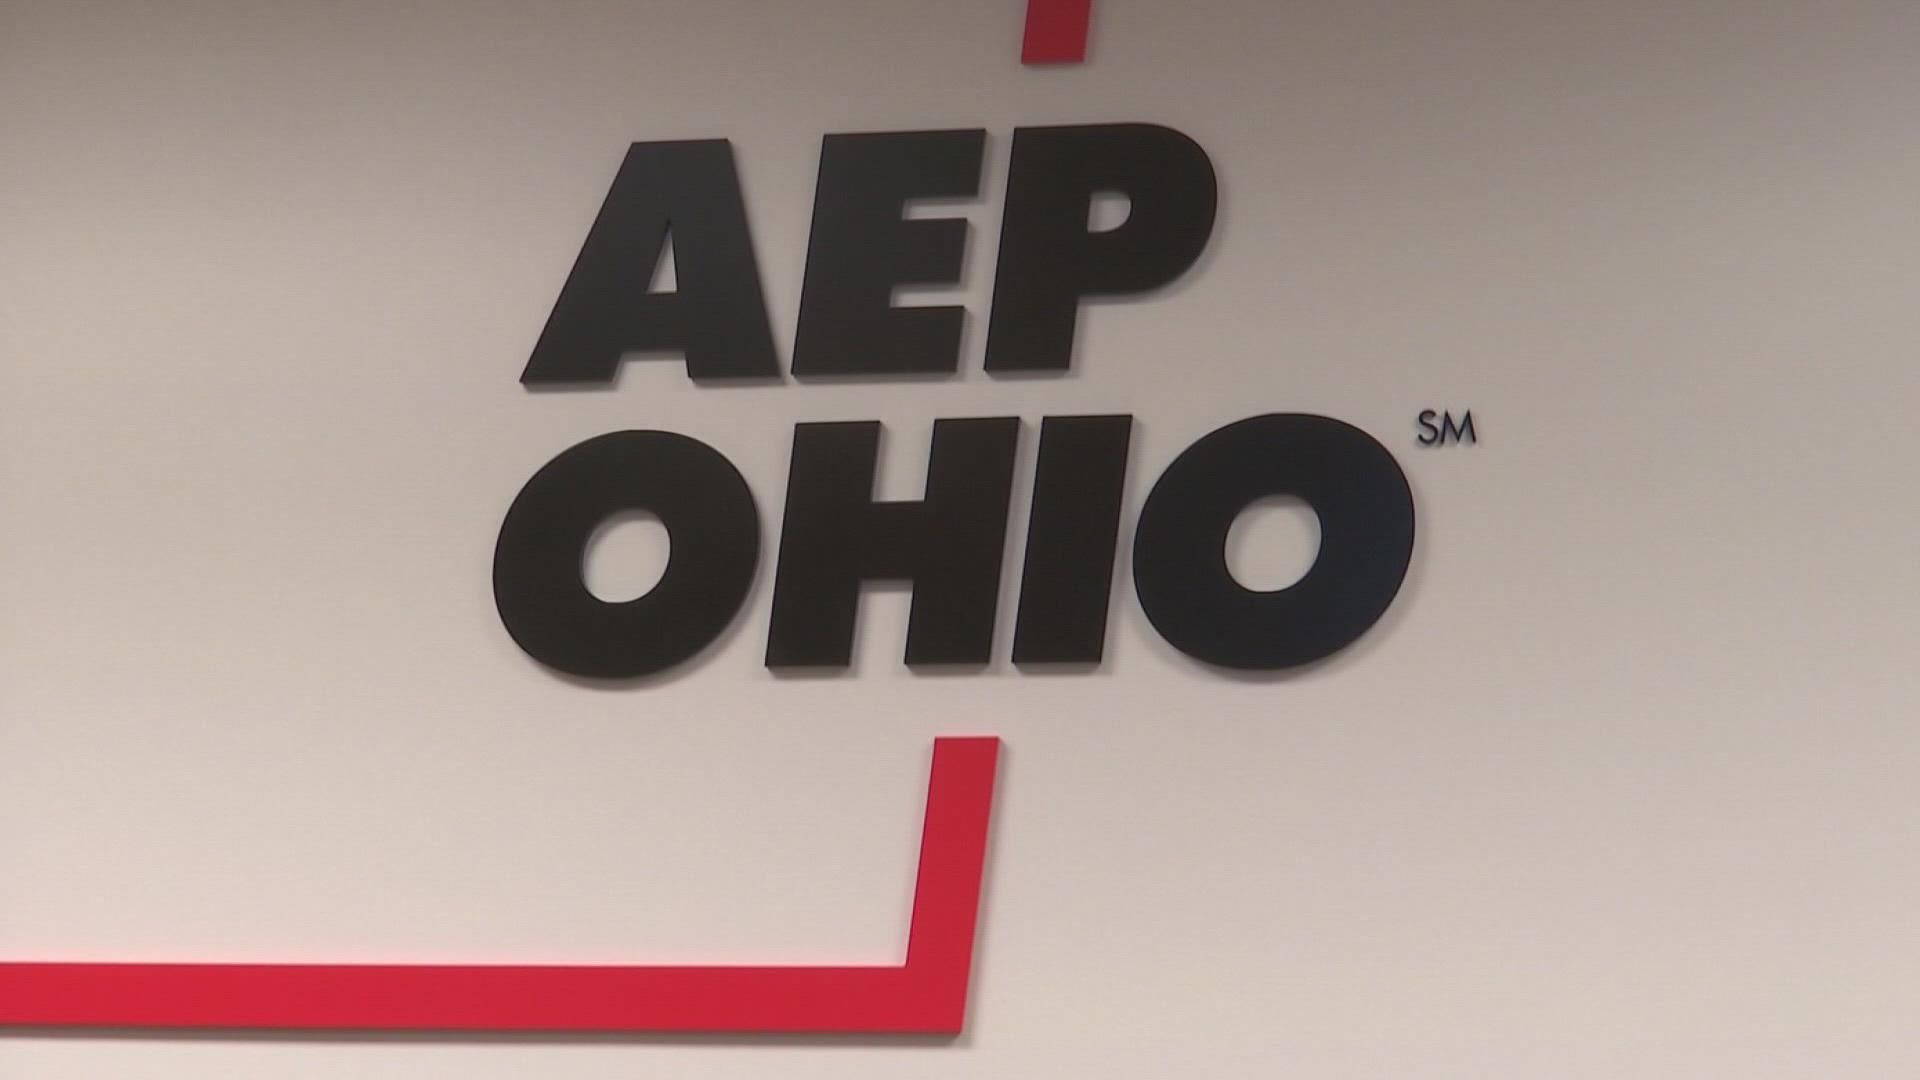 AEP Ohio’s plan would invest $2.2 billion in reliability-focused projects over the six-year term beginning in June 2024.